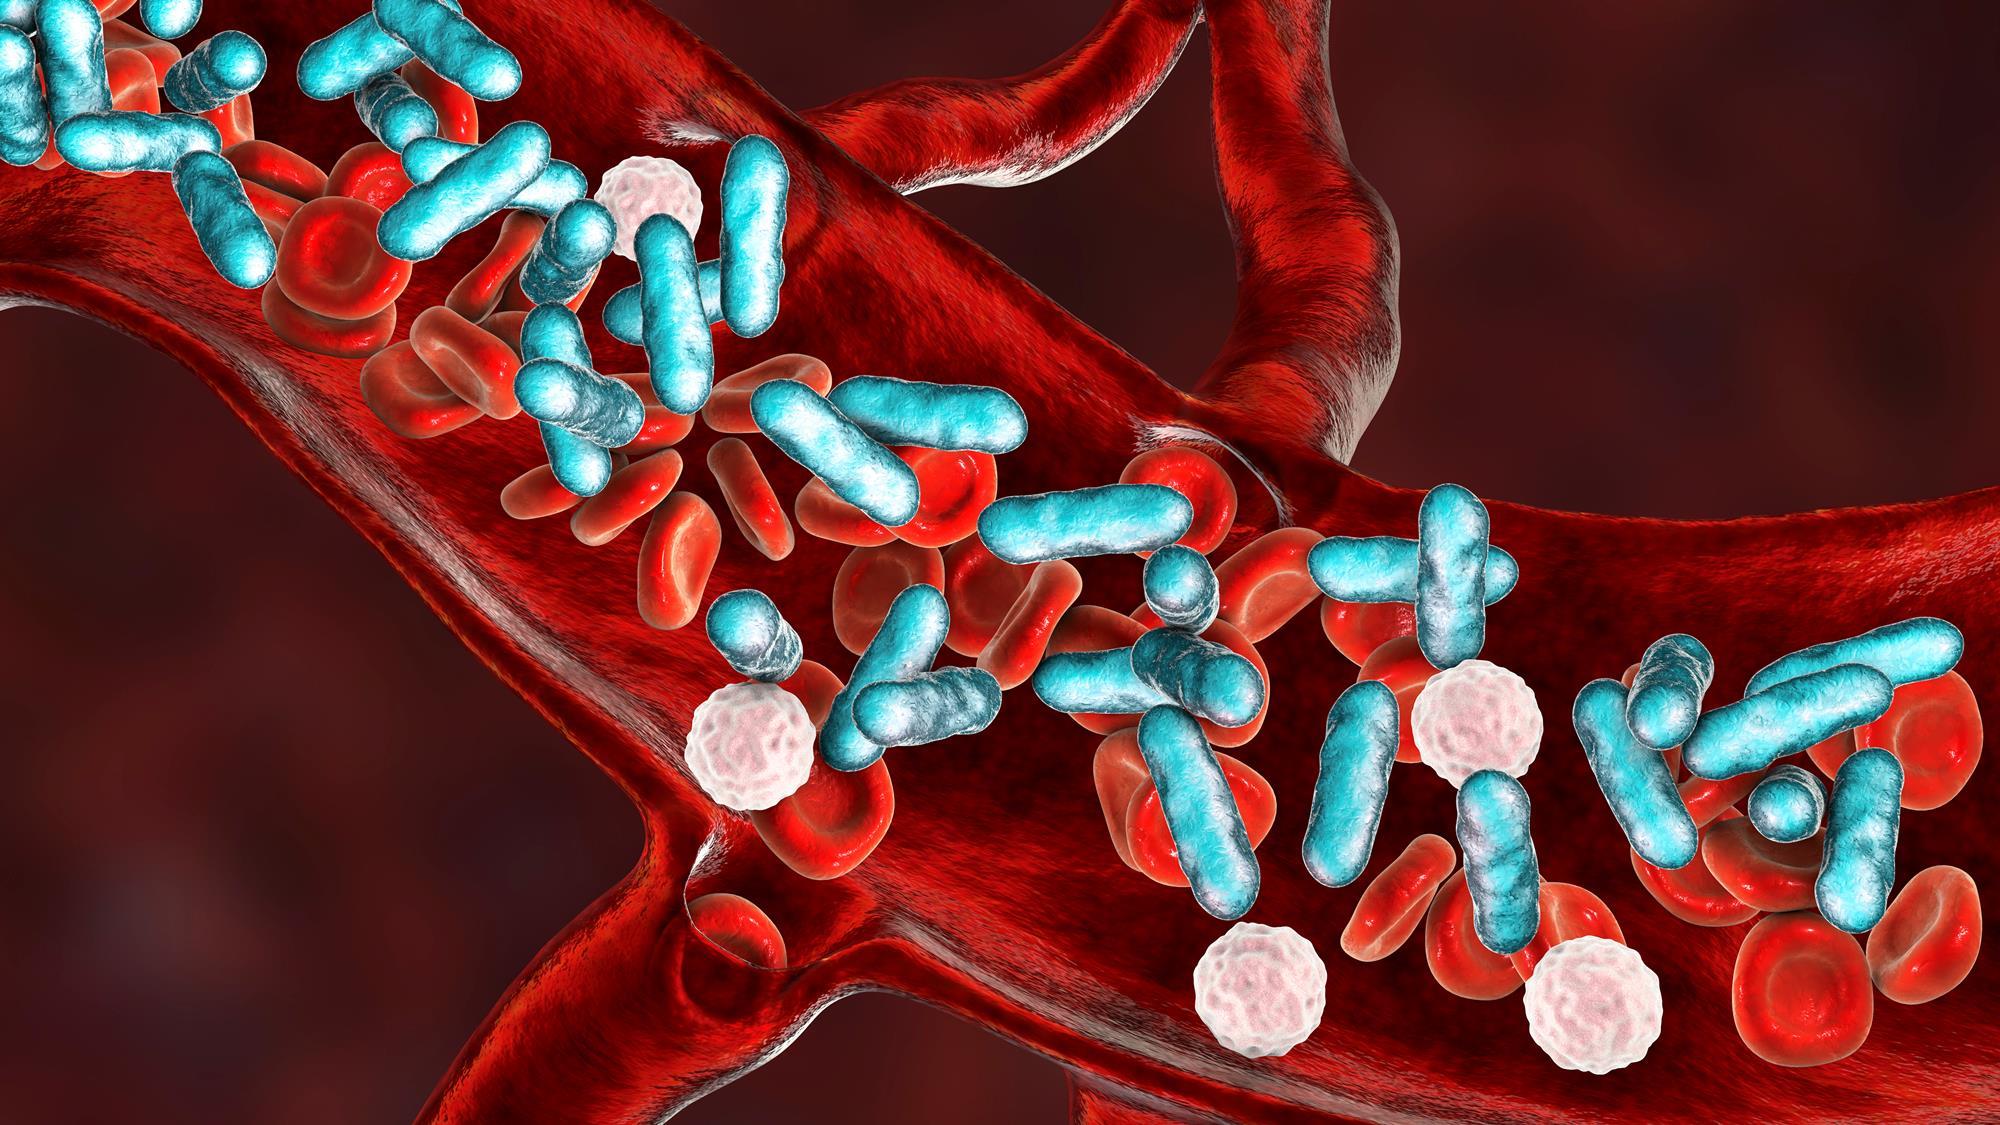  Test for antibiotic resistance genes provides answers within an hour 